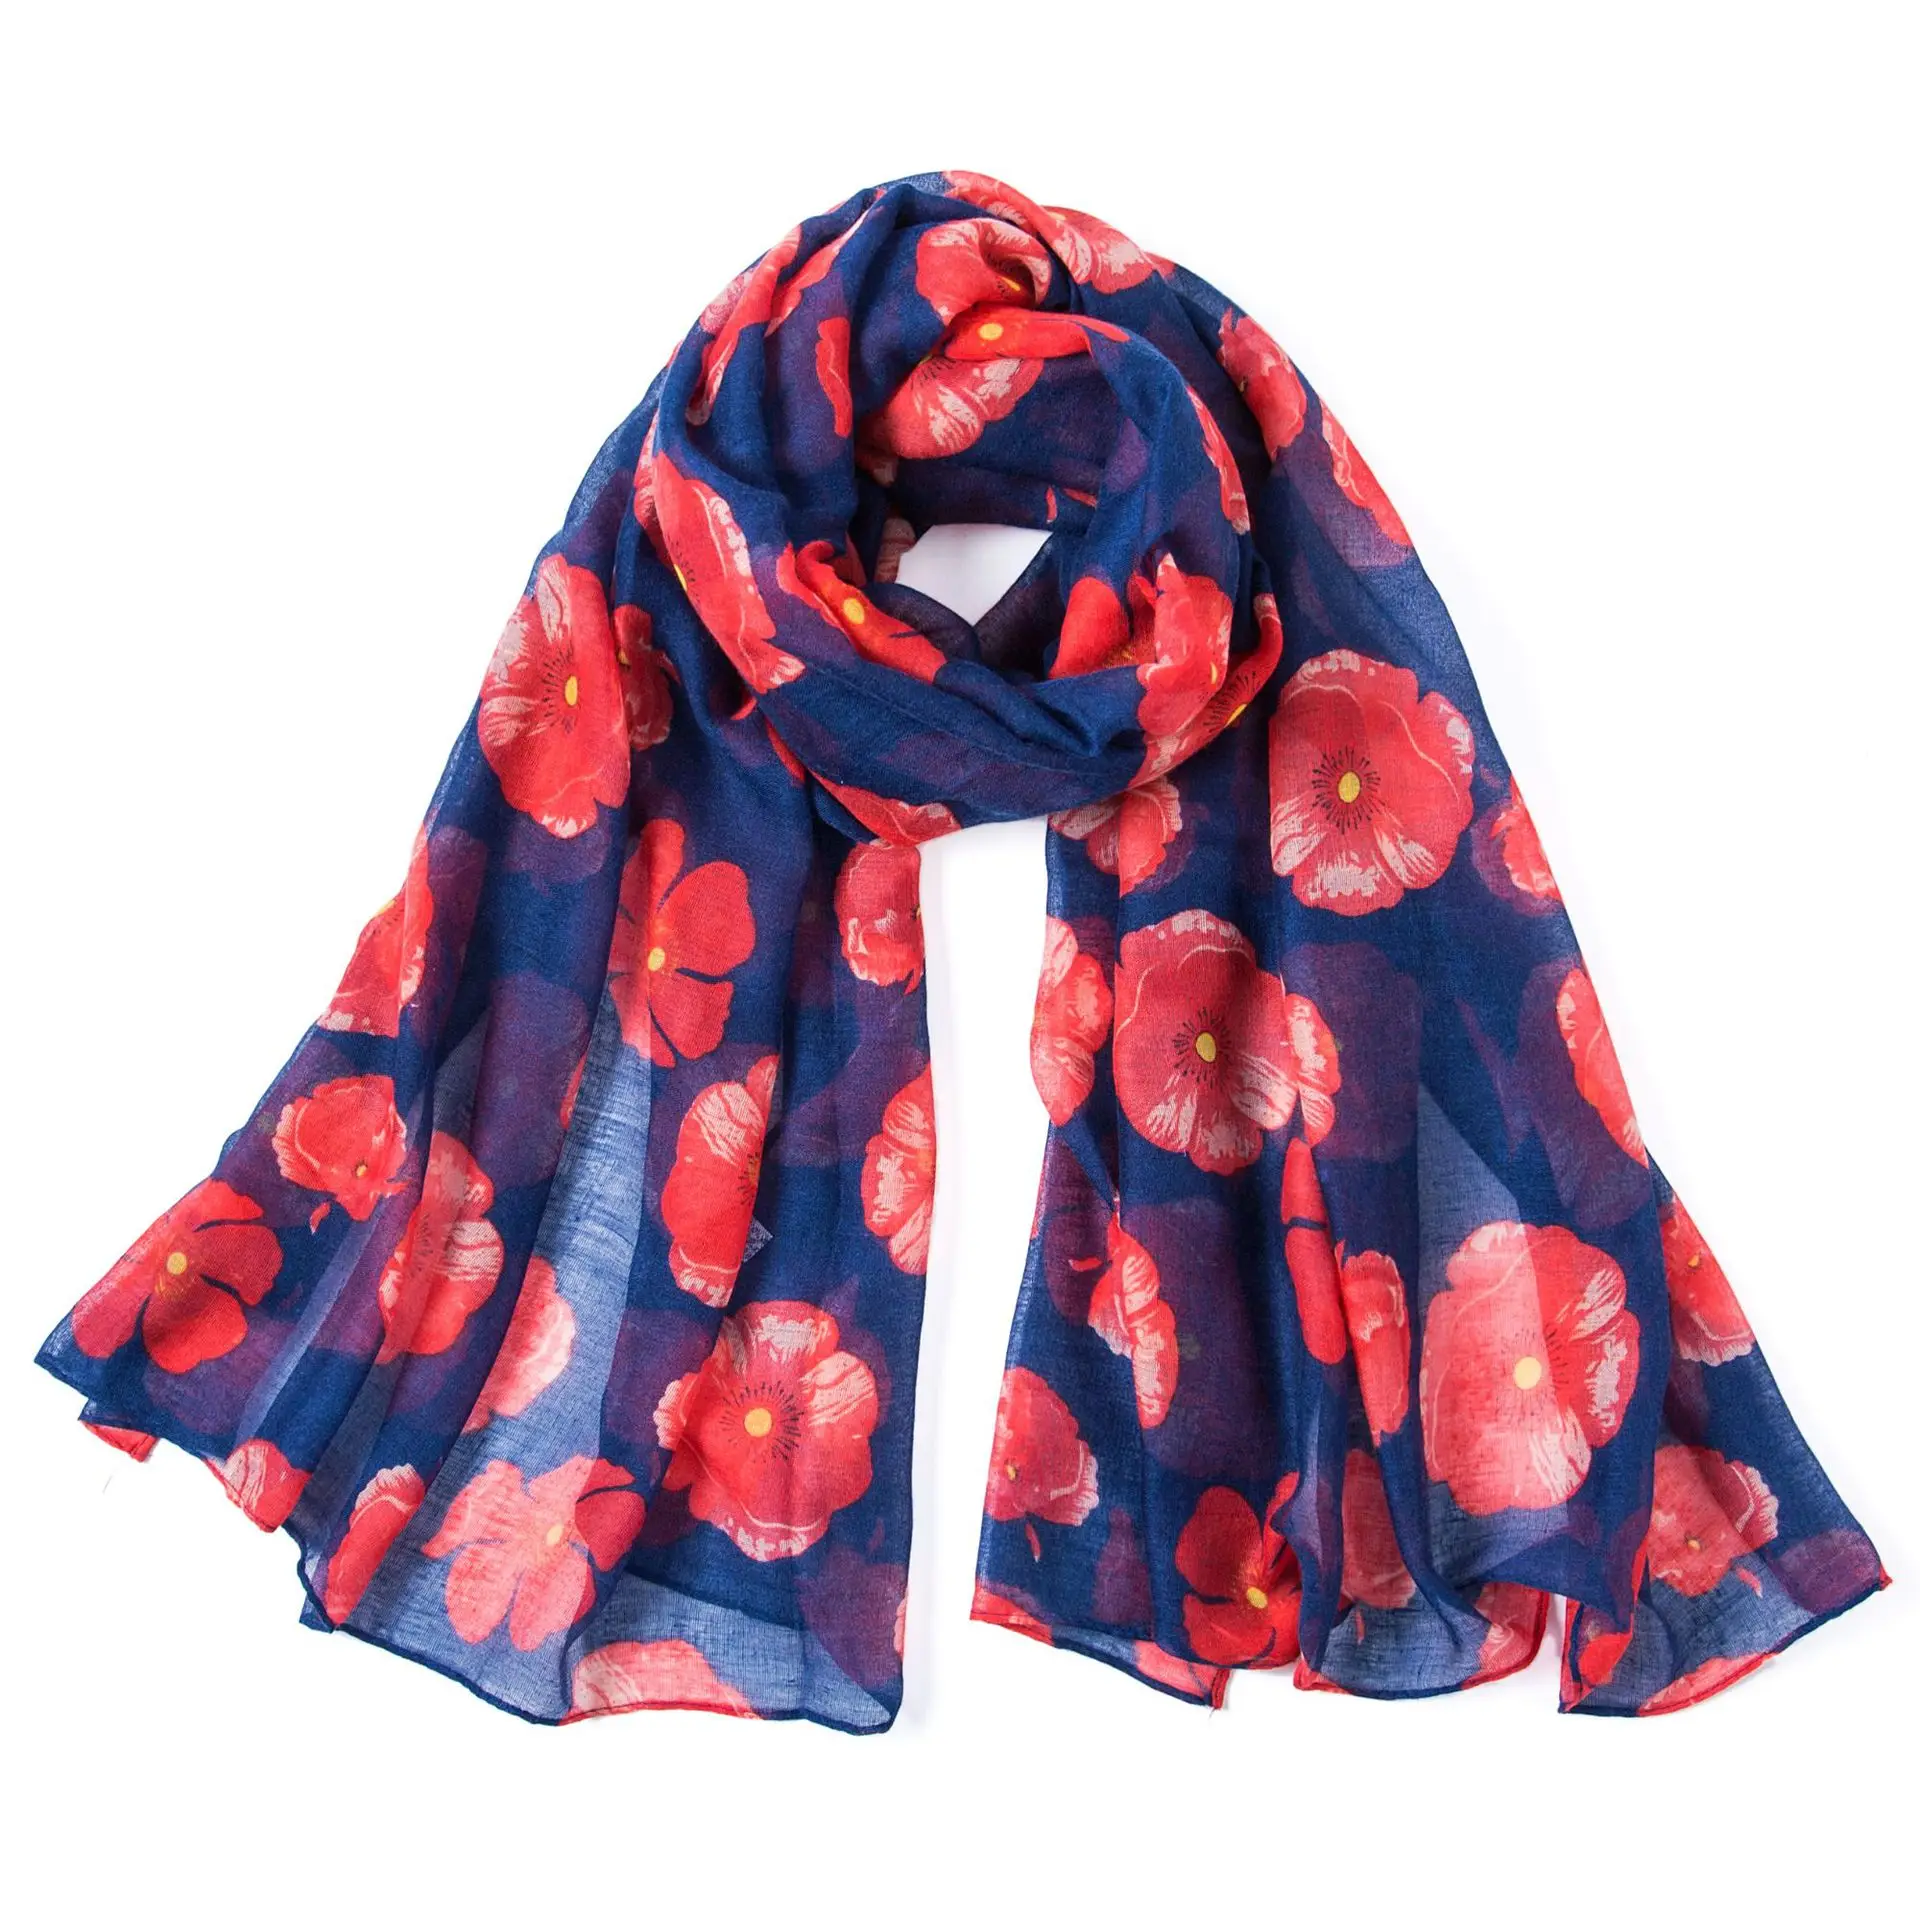 Navy Blue Poppy Scarf Red Flowers Wrap Floral Print Poppies Ladies Shawl New